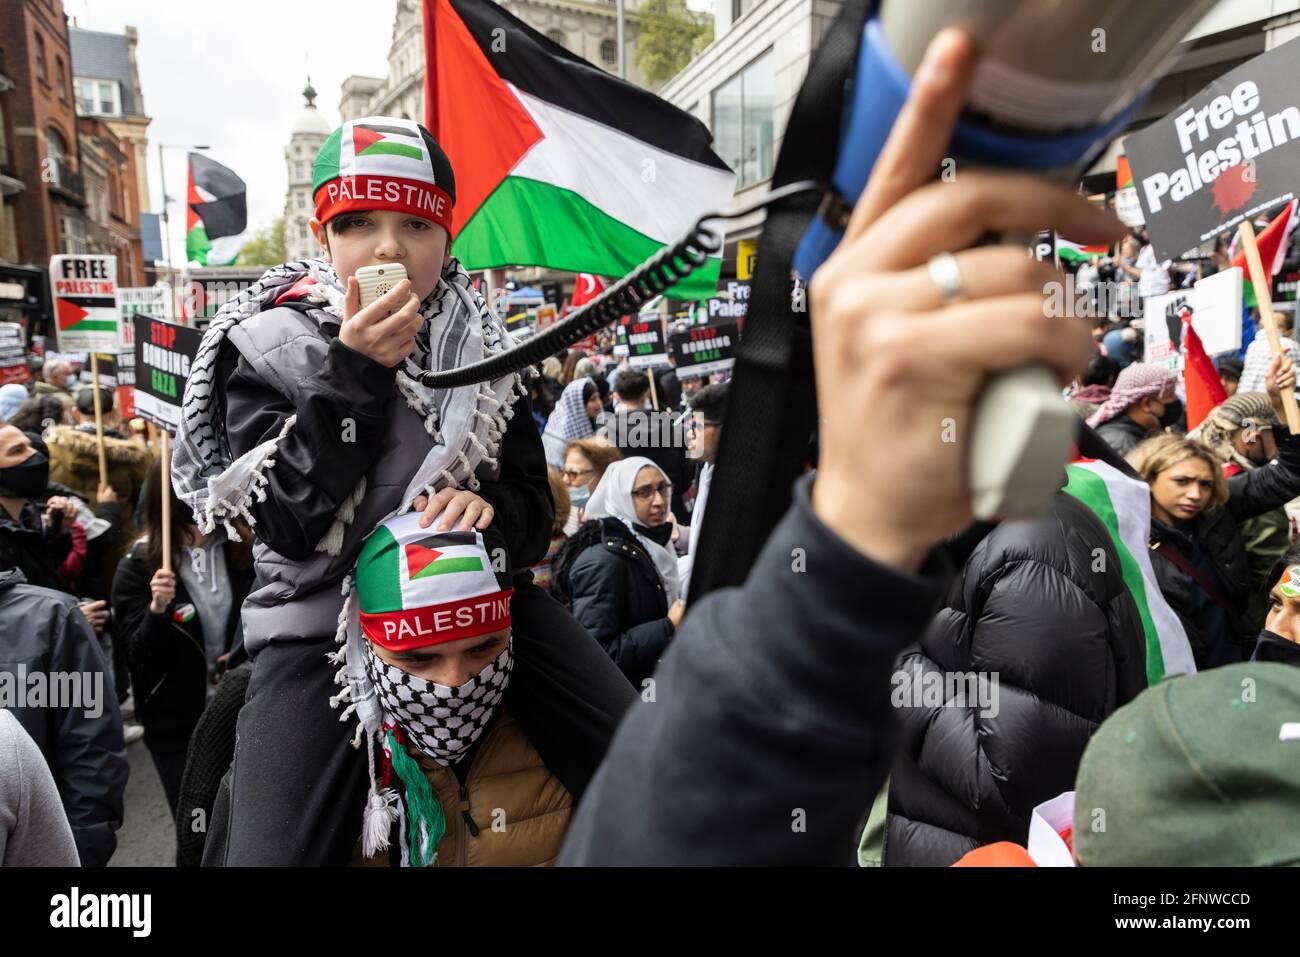 A child speaking into megaphone in a crowd, 'Free Palestine' solidarity protest, London, 15 May 2021 Stock Photo